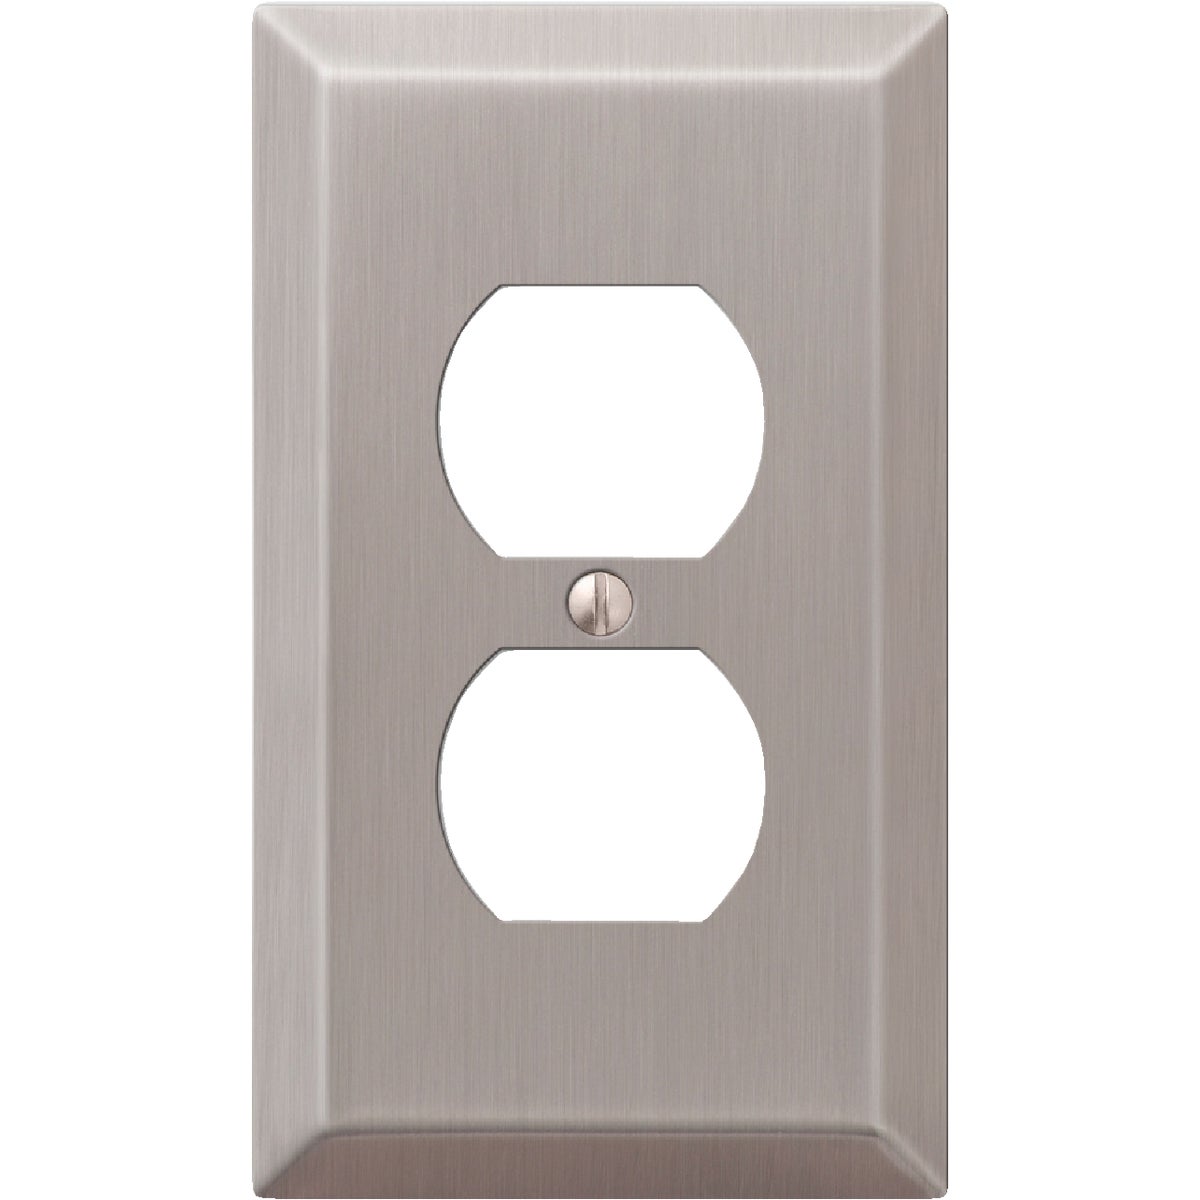 Item 556807, Stamped steel duplex outlet wall plate. Contemporary styling.